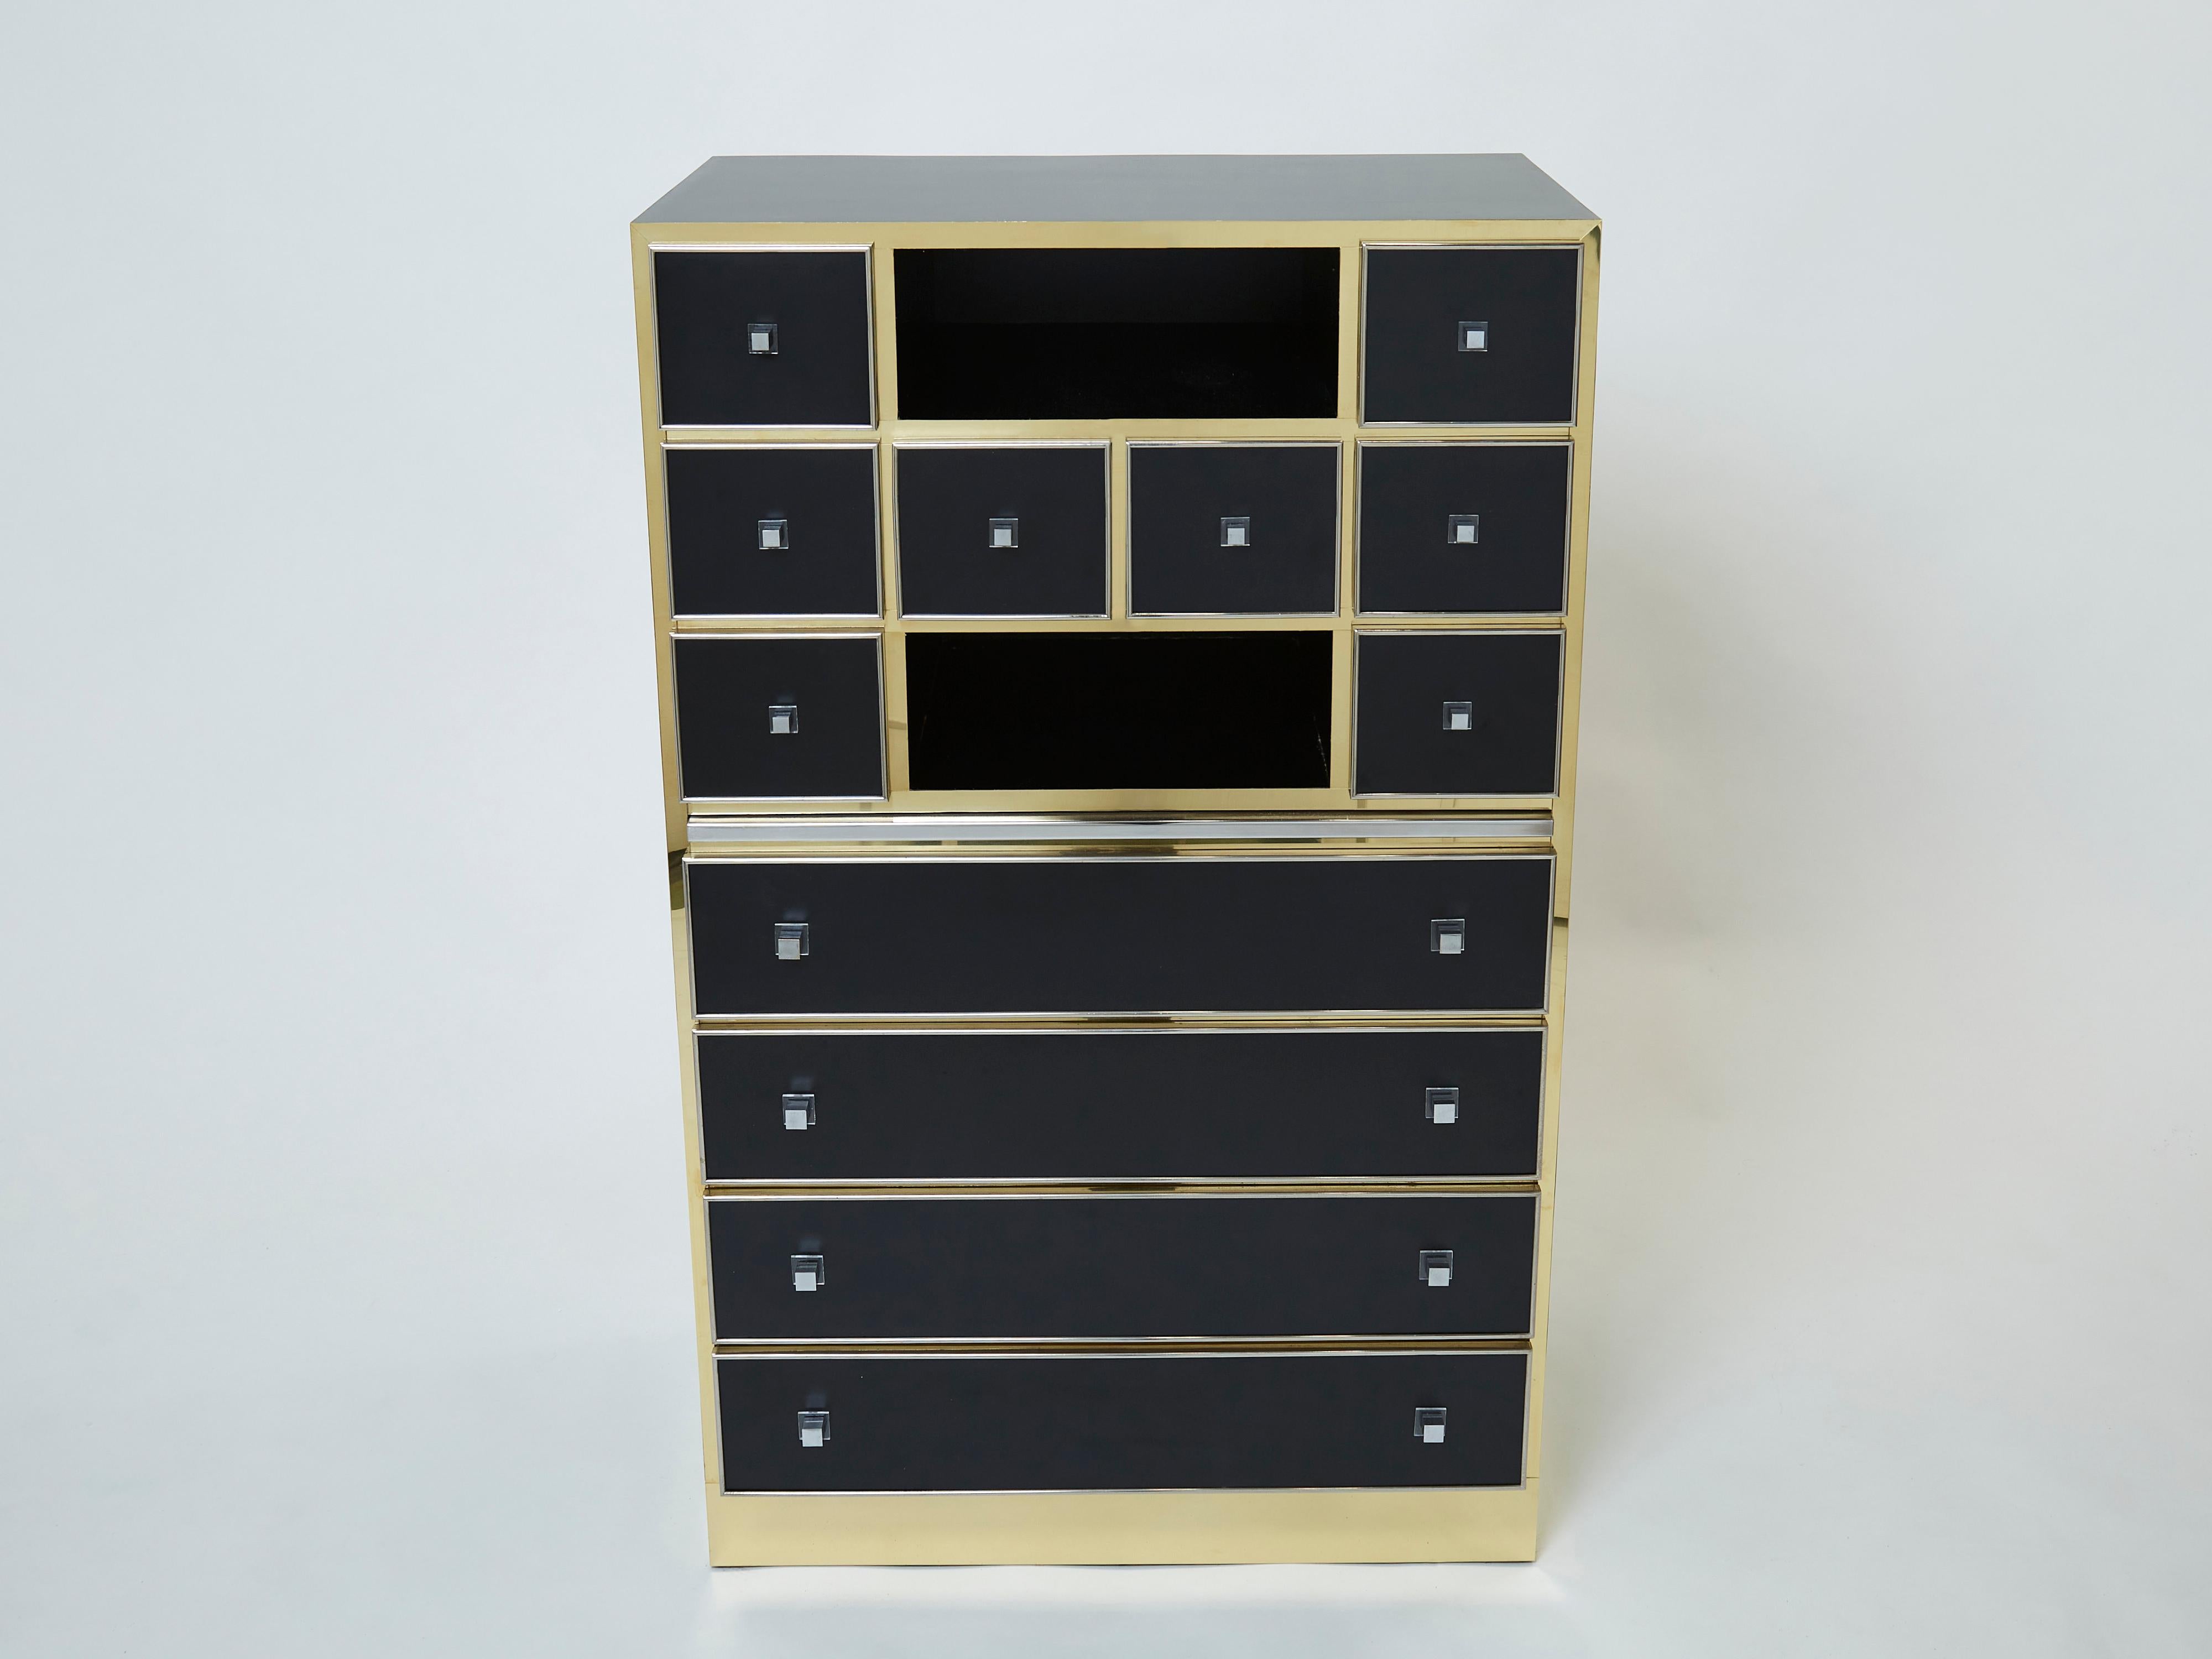 Unique French Mid-Century Modern cabinet secrétaire by Michel Pigneres made in the early 1970s. This piece is an exquisite example of refined, highly detailed and very well made furniture. It features eight small drawers, and four large ones, with a